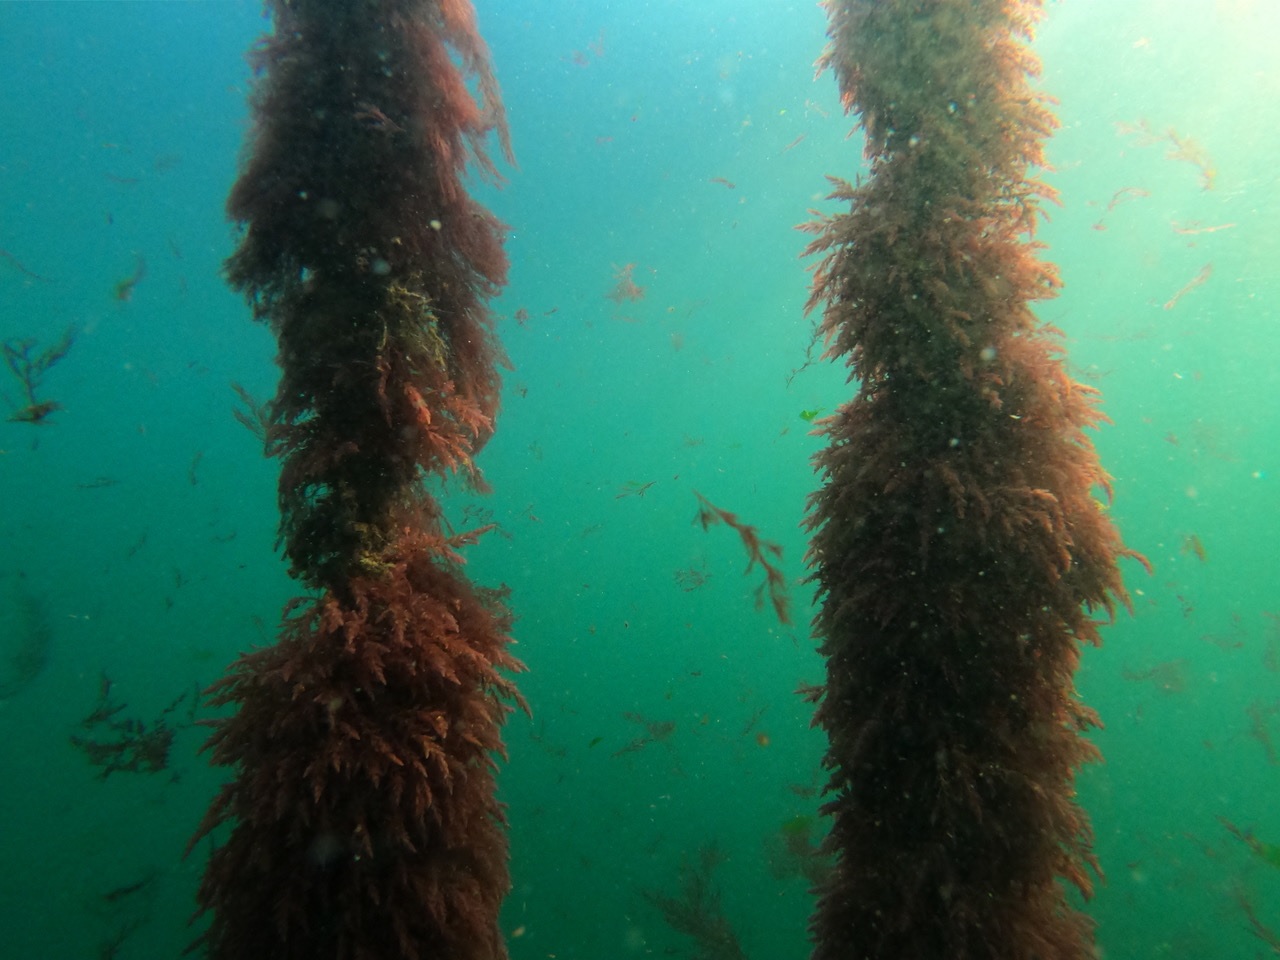 Asparagopsis growing on ropes in Tasmania - Sea Forest